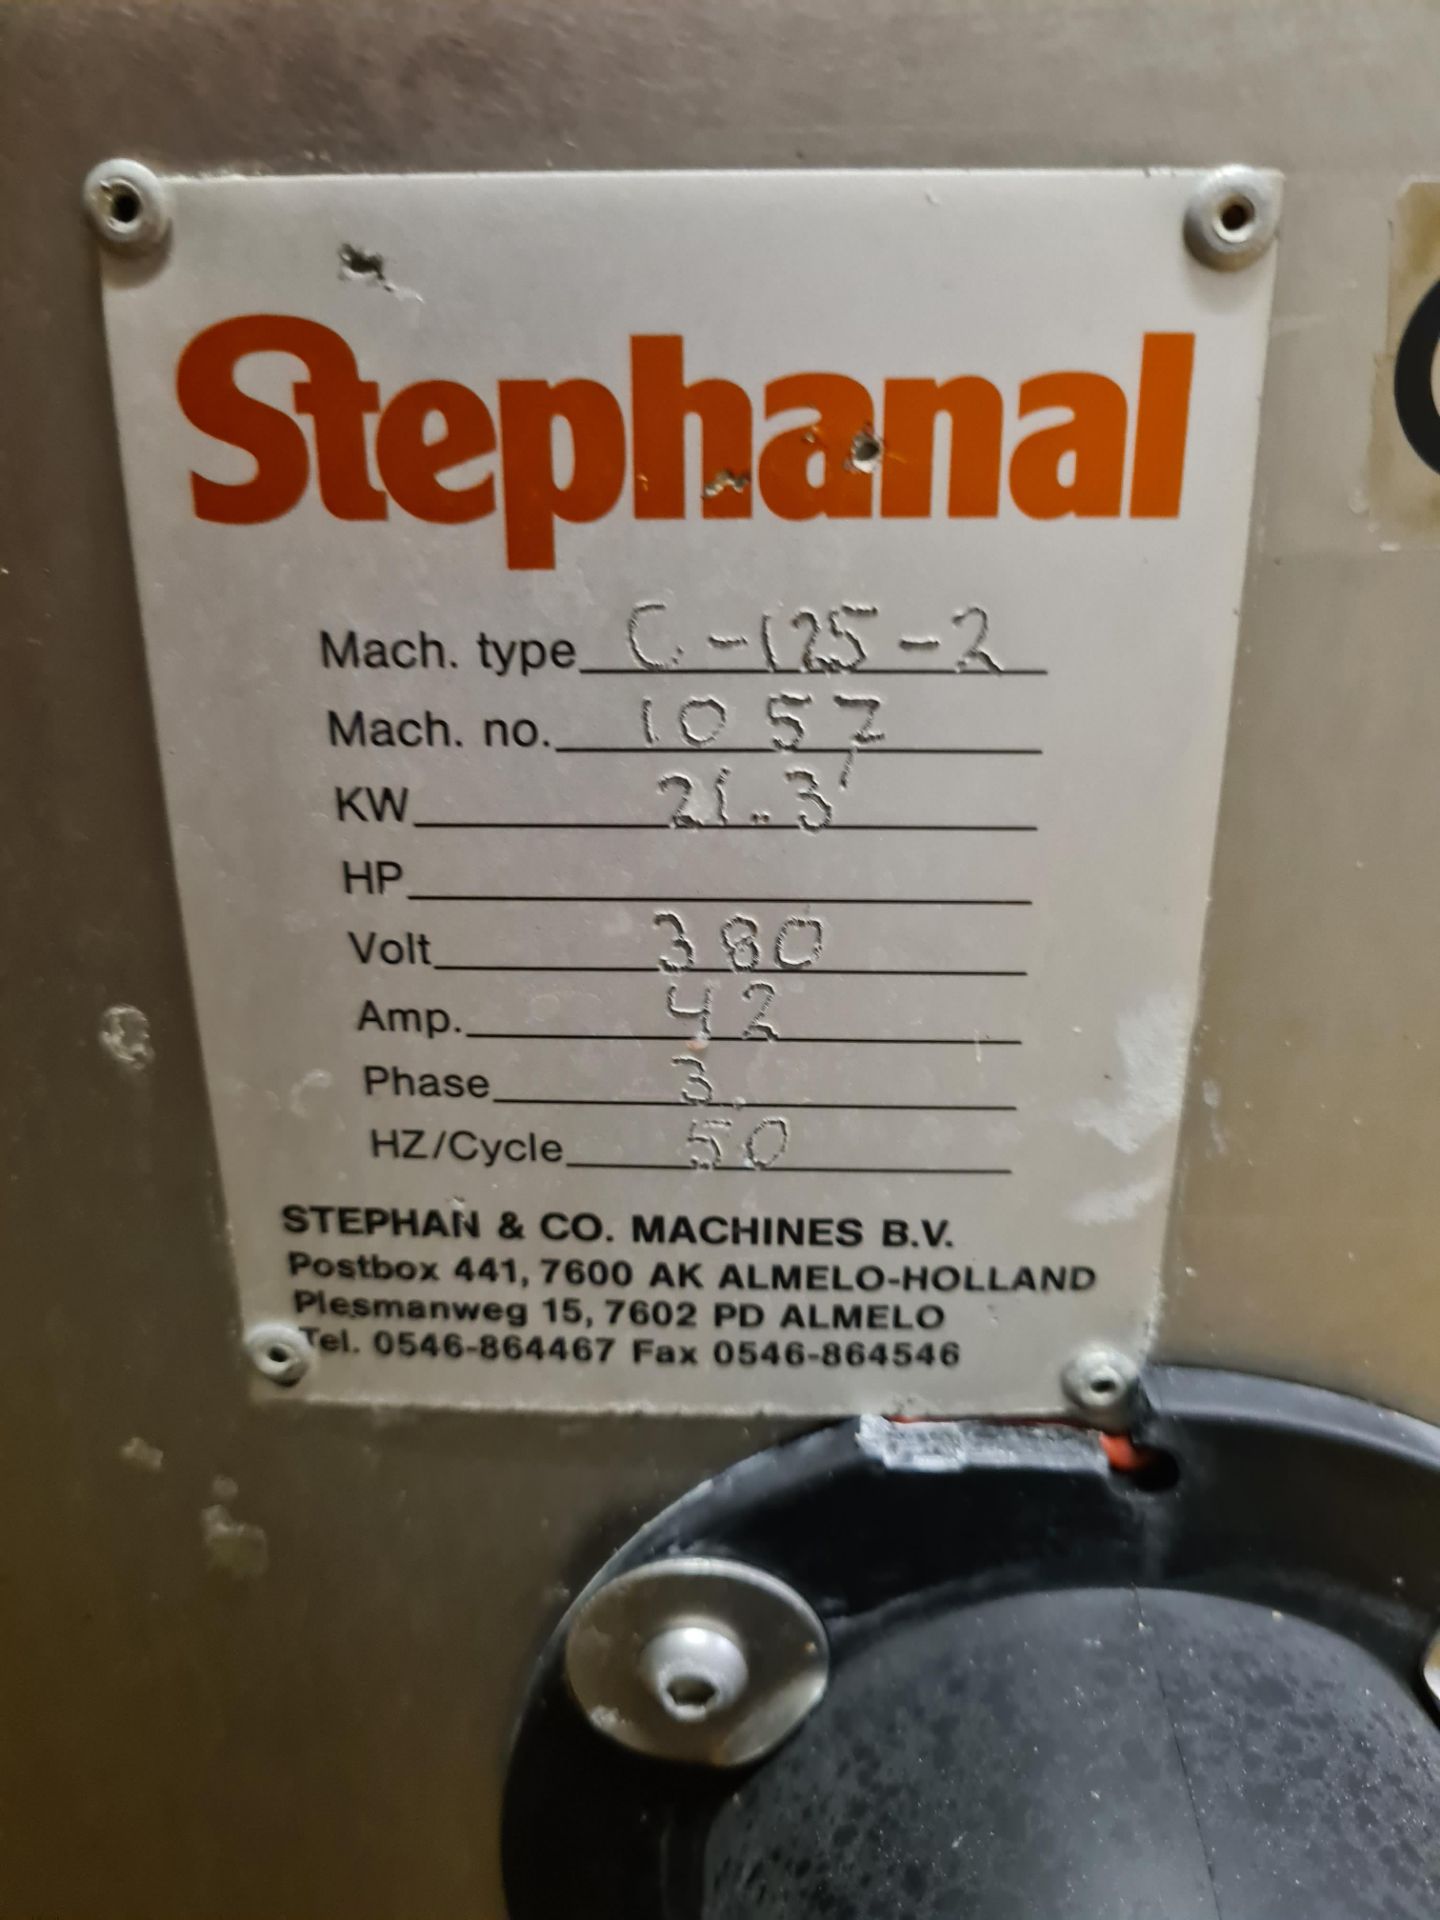 Stephamal C-125-2 STAINLESS STEEL CUTTER/ MIXER, serial no. 1057Please read the following - Image 6 of 6